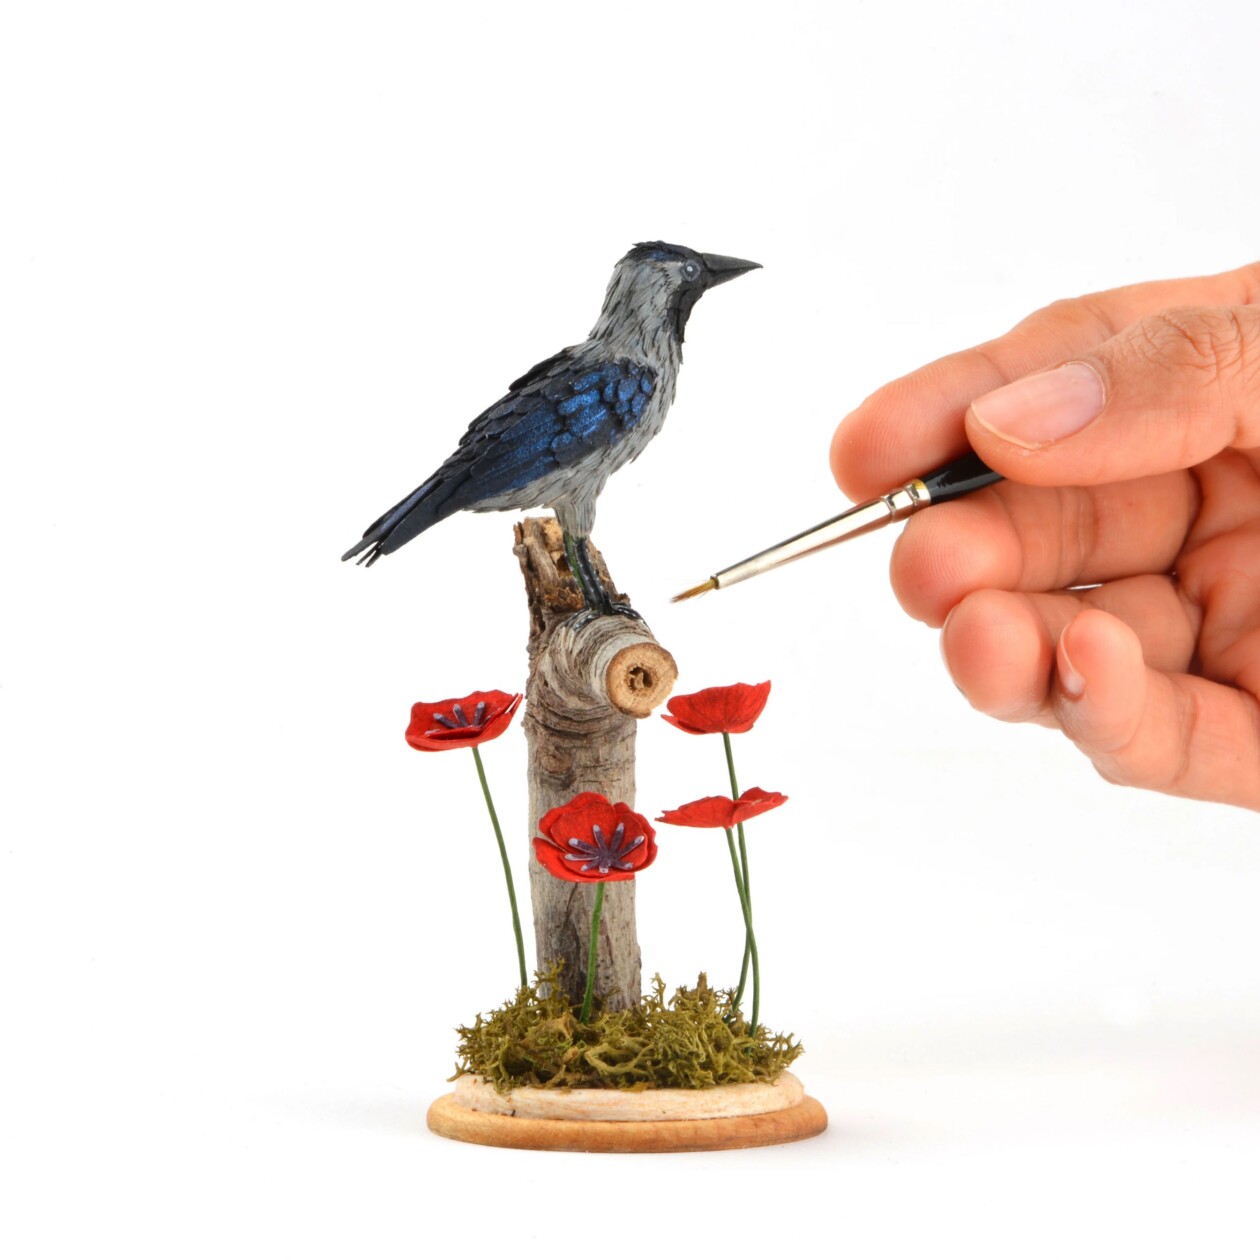 Miniature Bird Paper Sculptures With Whimsical Details By Nayan And Venus (11)